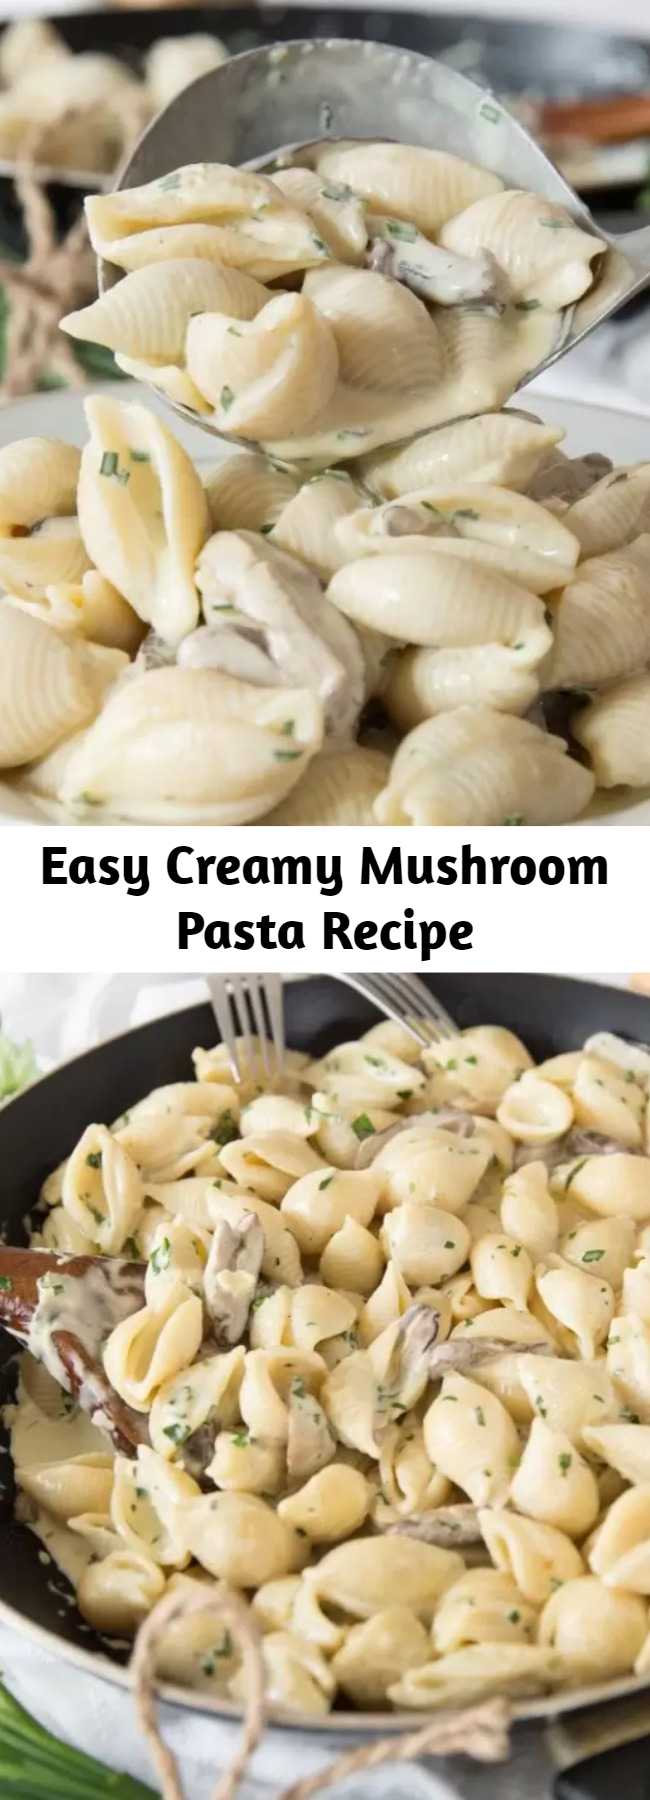 Easy Creamy Mushroom Pasta Recipe - This Creamy Mushroom Pasta is the perfect easy dinner to feed a family of four. Hidden in this smooth and silky mushroom sauce is an absolute explosion of flavour just waiting to be devoured! #creamy #creamypasta #mushroom #mushroompasta #creamymushroompasta